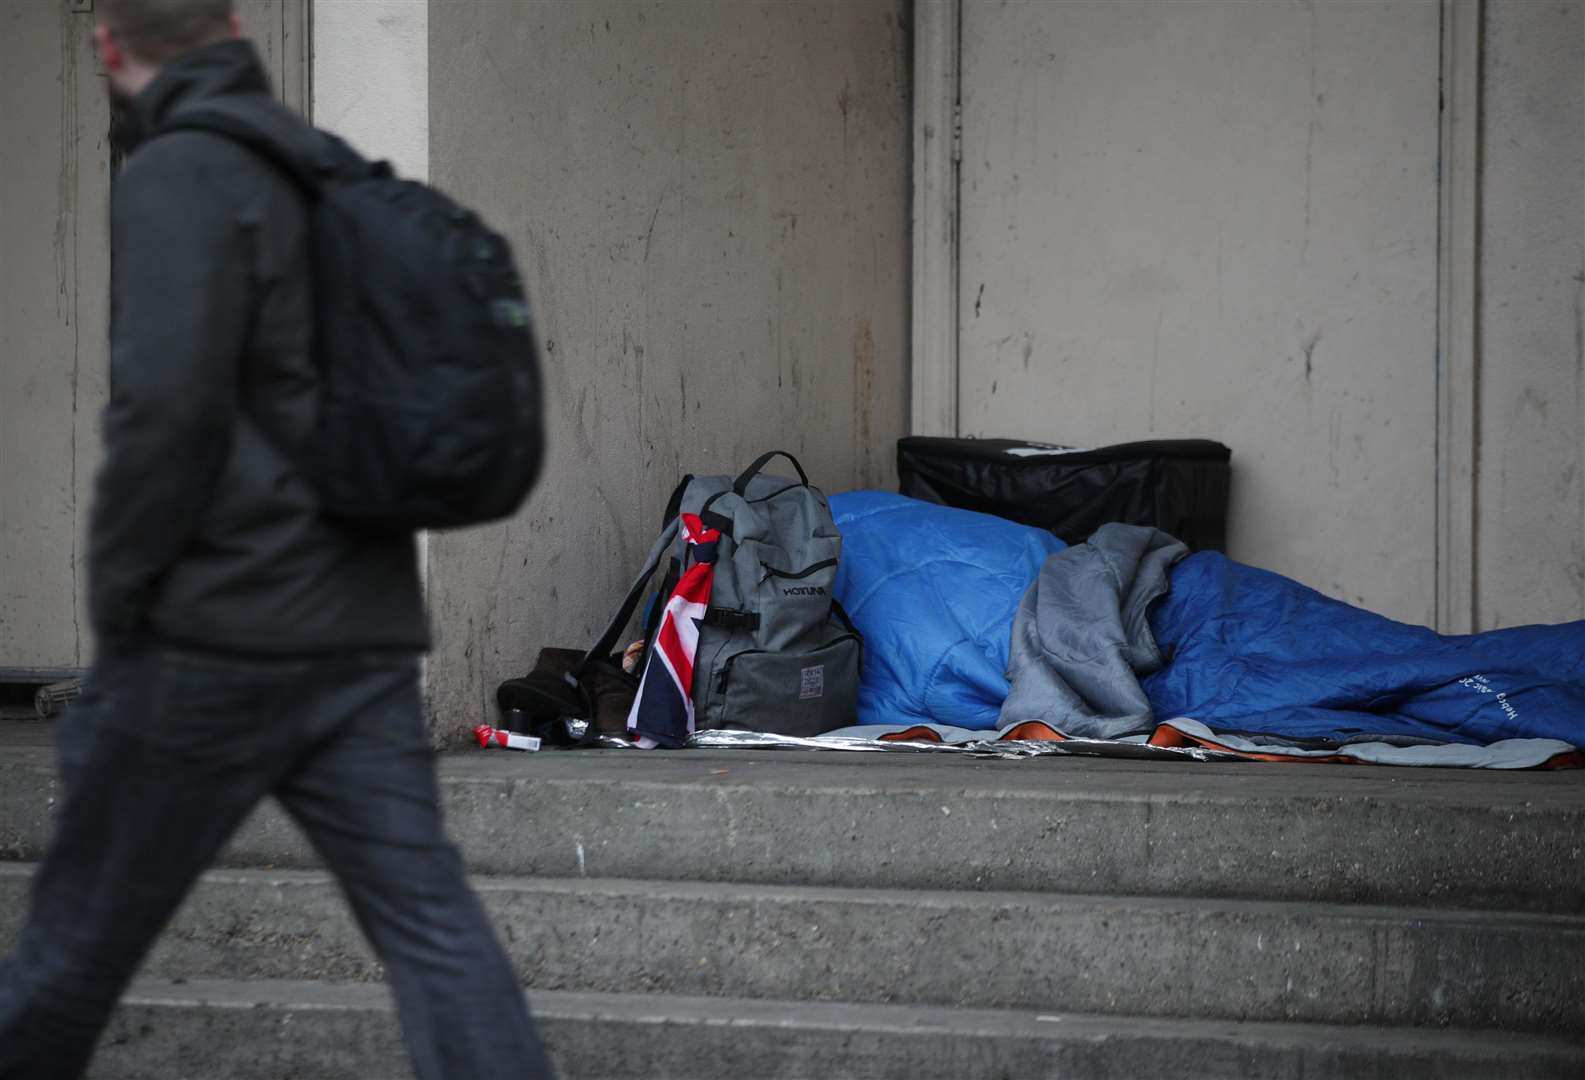 Rough sleepers and beggars not seeking the proper support could be fined in Tunbridge Wells as part of a new Public Space Protection Order